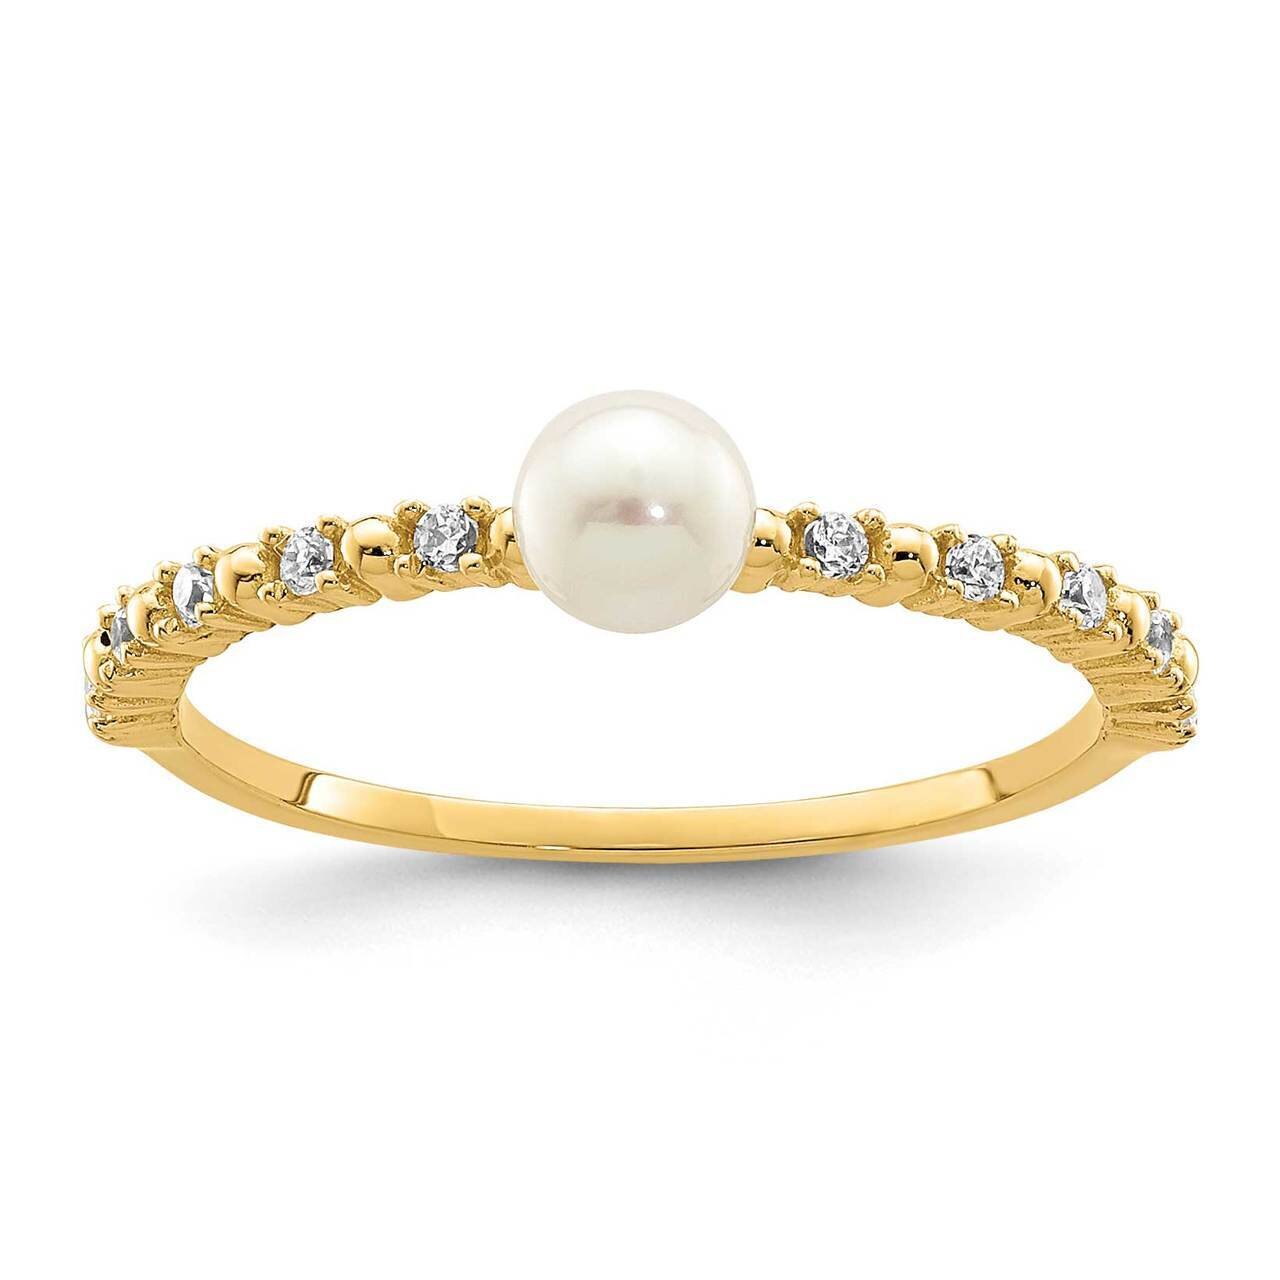 3-4mm White Button Freshwater Cultured Pearl Ring 14k Gold CZ Diamond SE2878